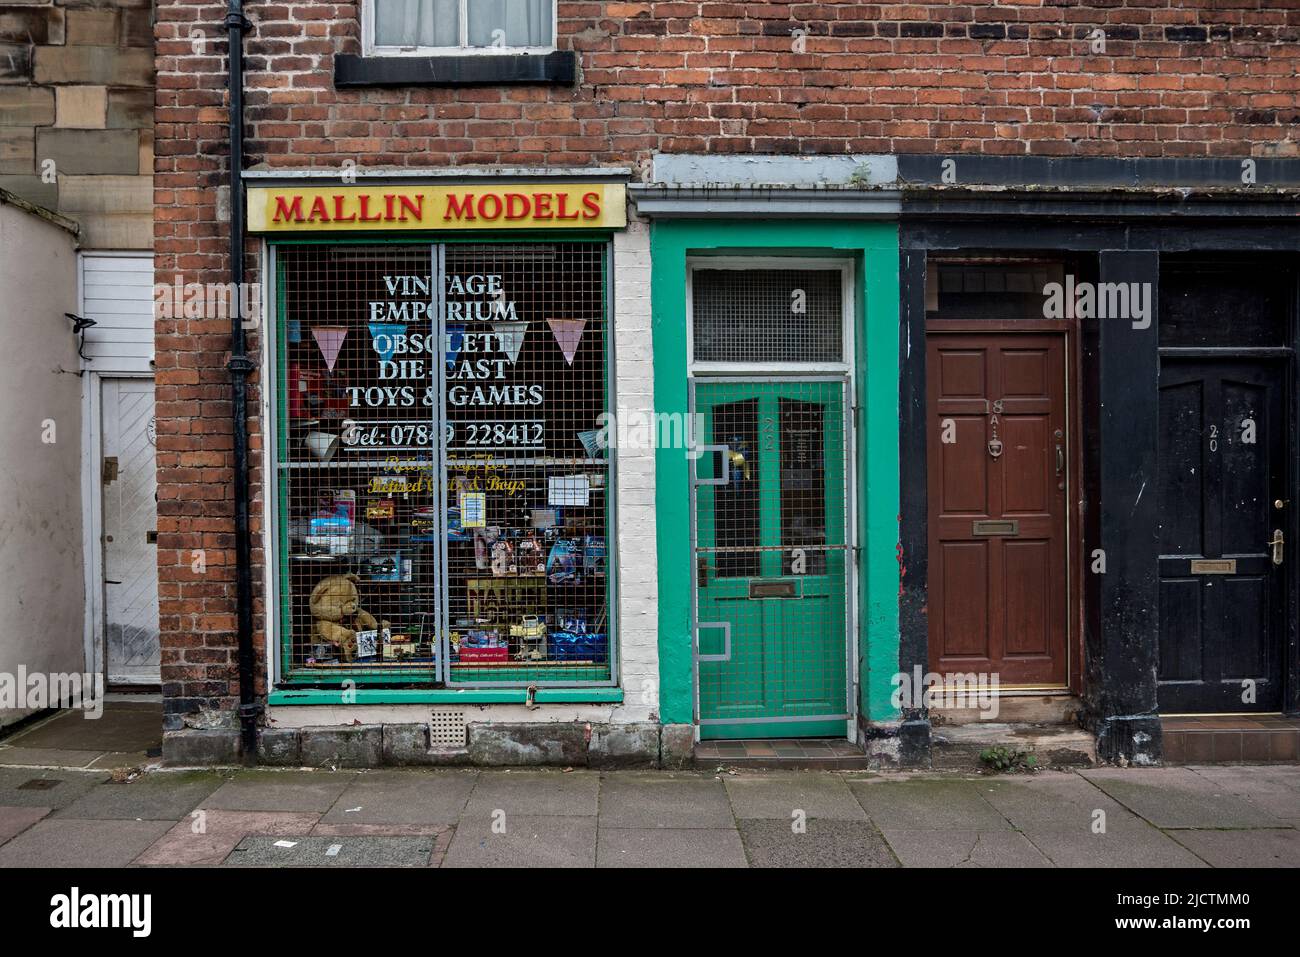 Mallin Models, Vintage Emporium dealing in obsolete die-cast toys and games in Abbey Street, Carlisle, Cumbria, England, UK. Stock Photo